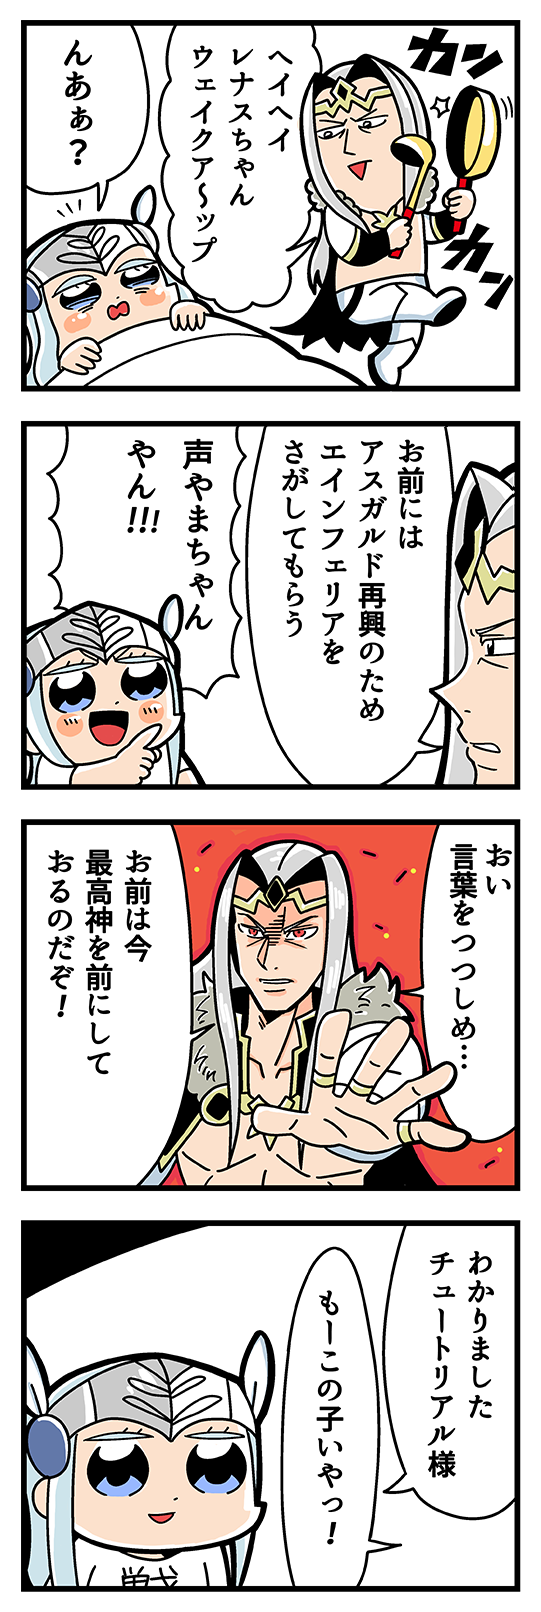 1boy 1girl 4koma :d annoyed bkub blue_eyes blush cape comic frying_pan grey_hair headpiece helmet highres jewelry ladle lenneth_valkyrie long_hair open_mouth pants parted_lips pointing red_eyes ring shirt simple_background smile soup_ladle speech_bubble t-shirt talking translation_request two-tone_background under_covers valkyrie_profile valkyrie_profile_anatomia winged_helmet